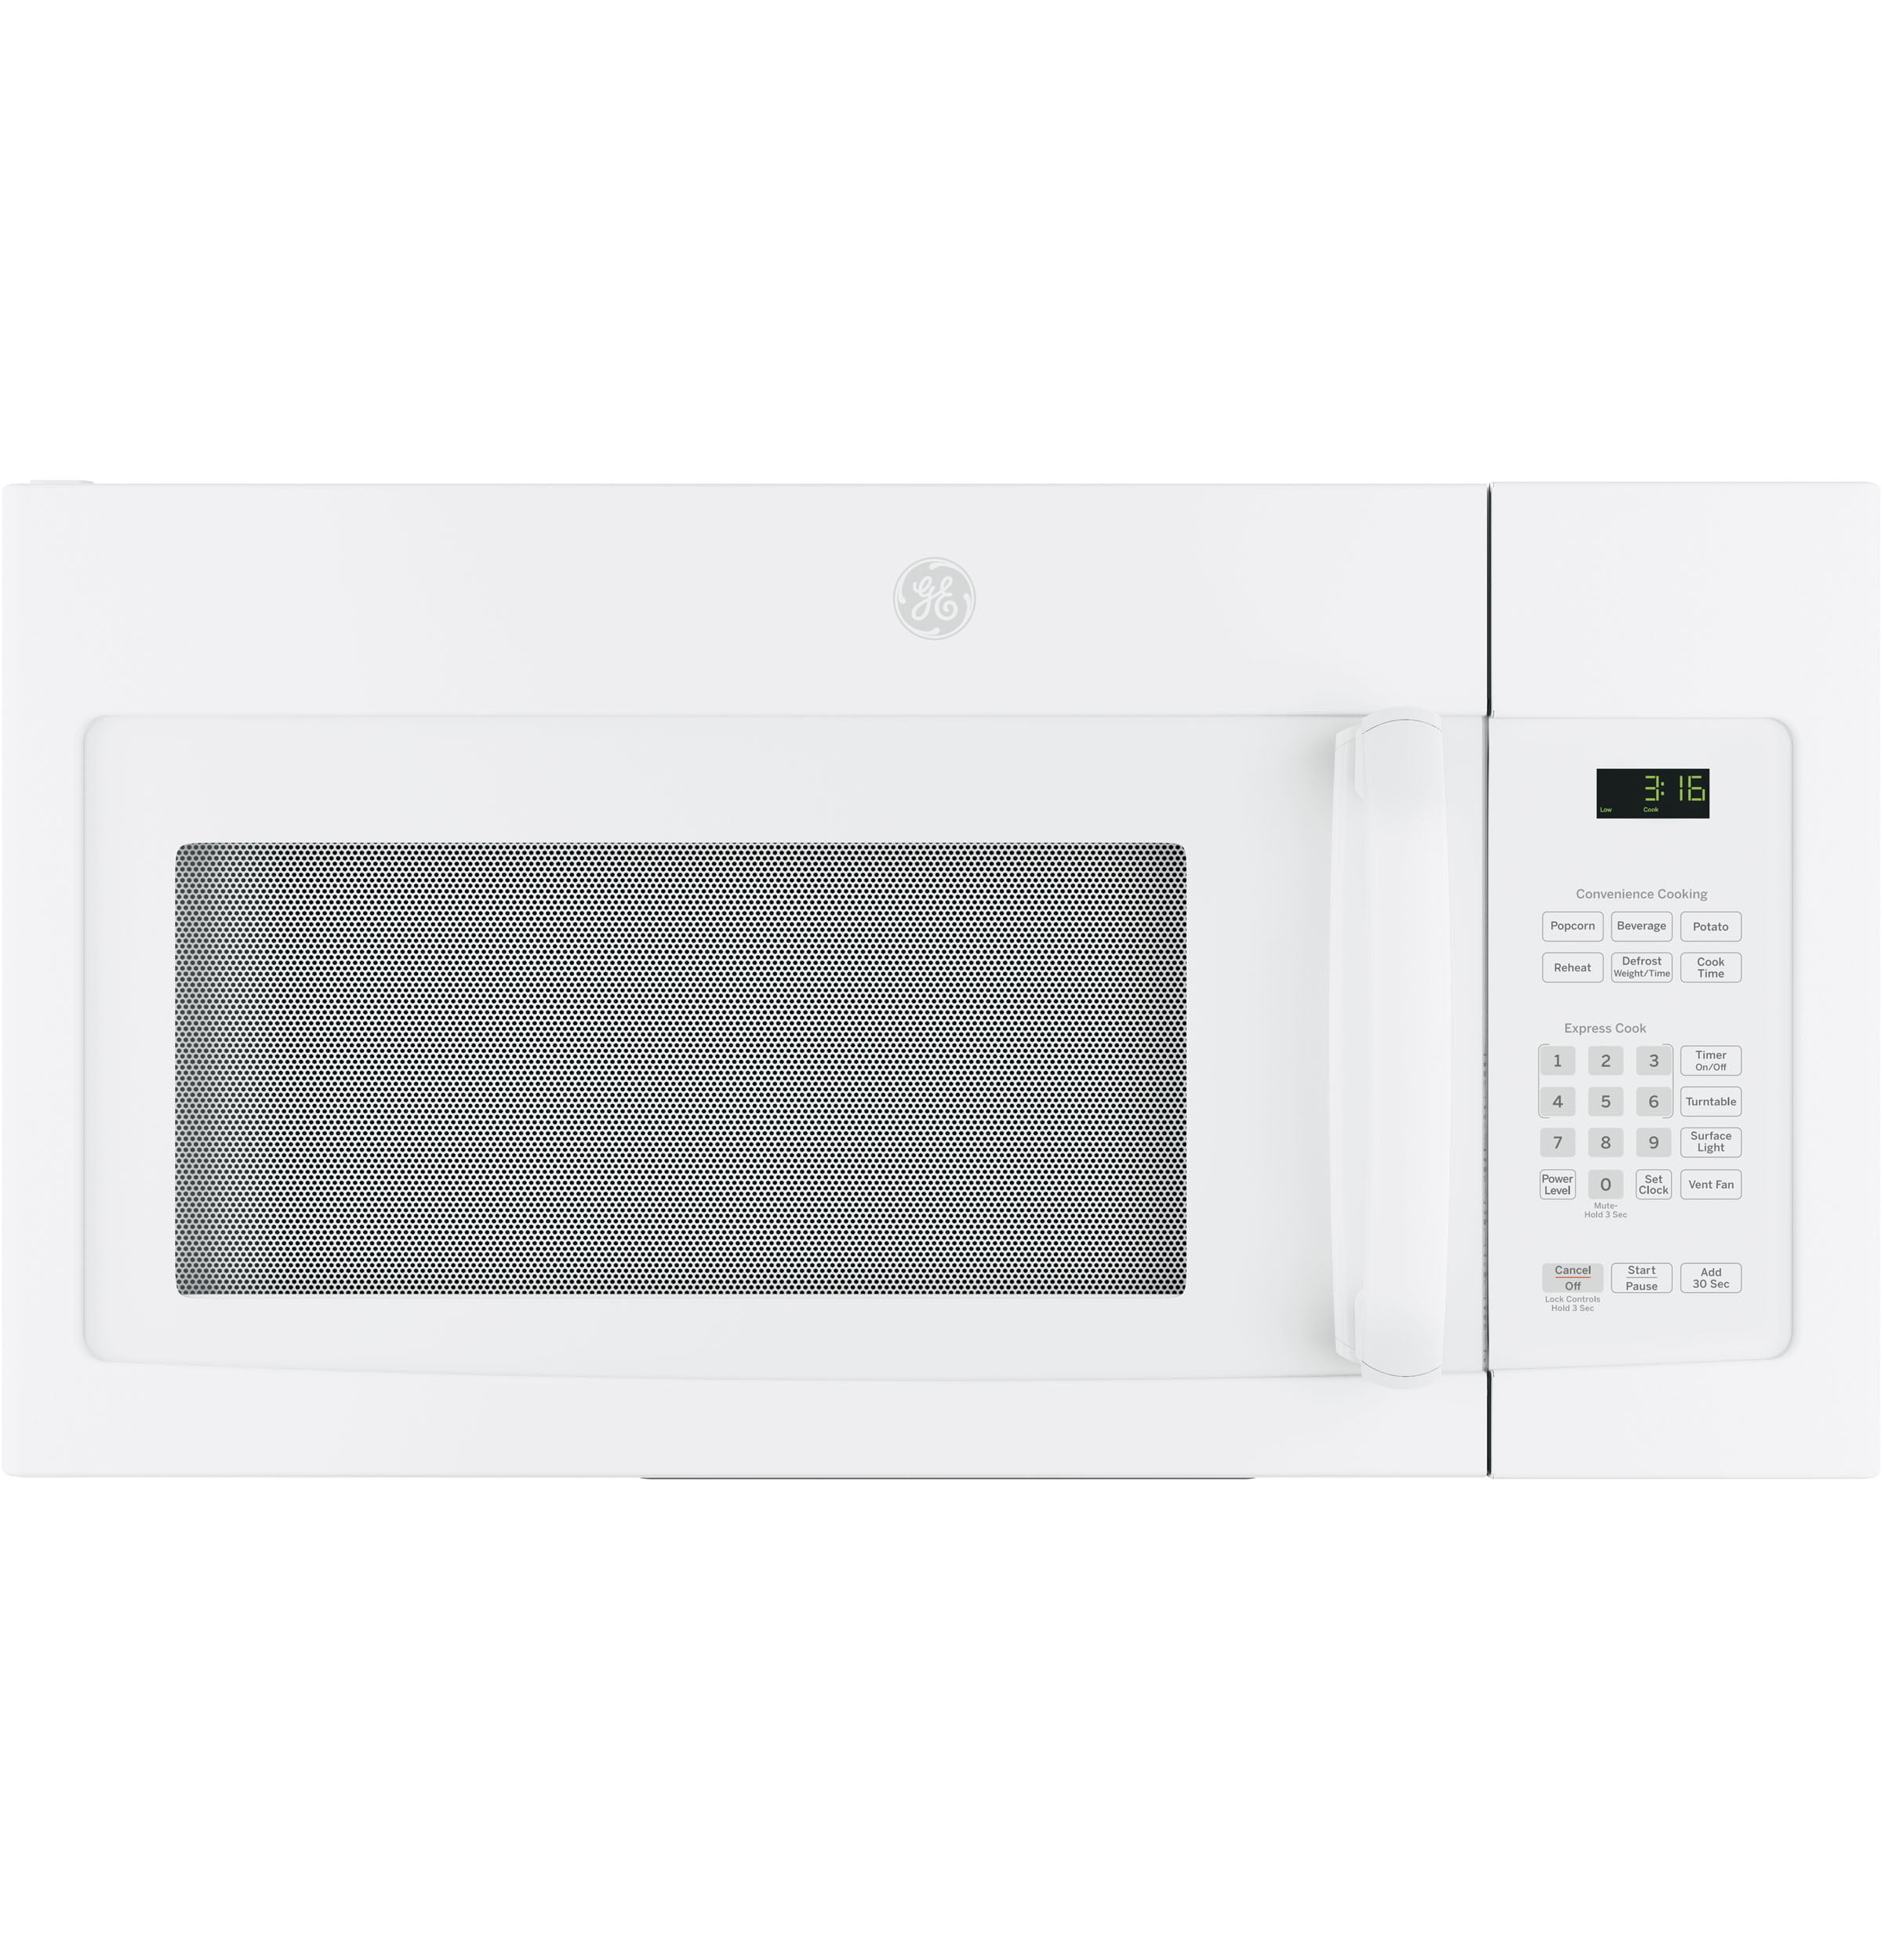 GE 1.5 CU.FT. OVER-THE-RANGE MICROWAVE OVEN, WHITE, 950 W - Walmart.com